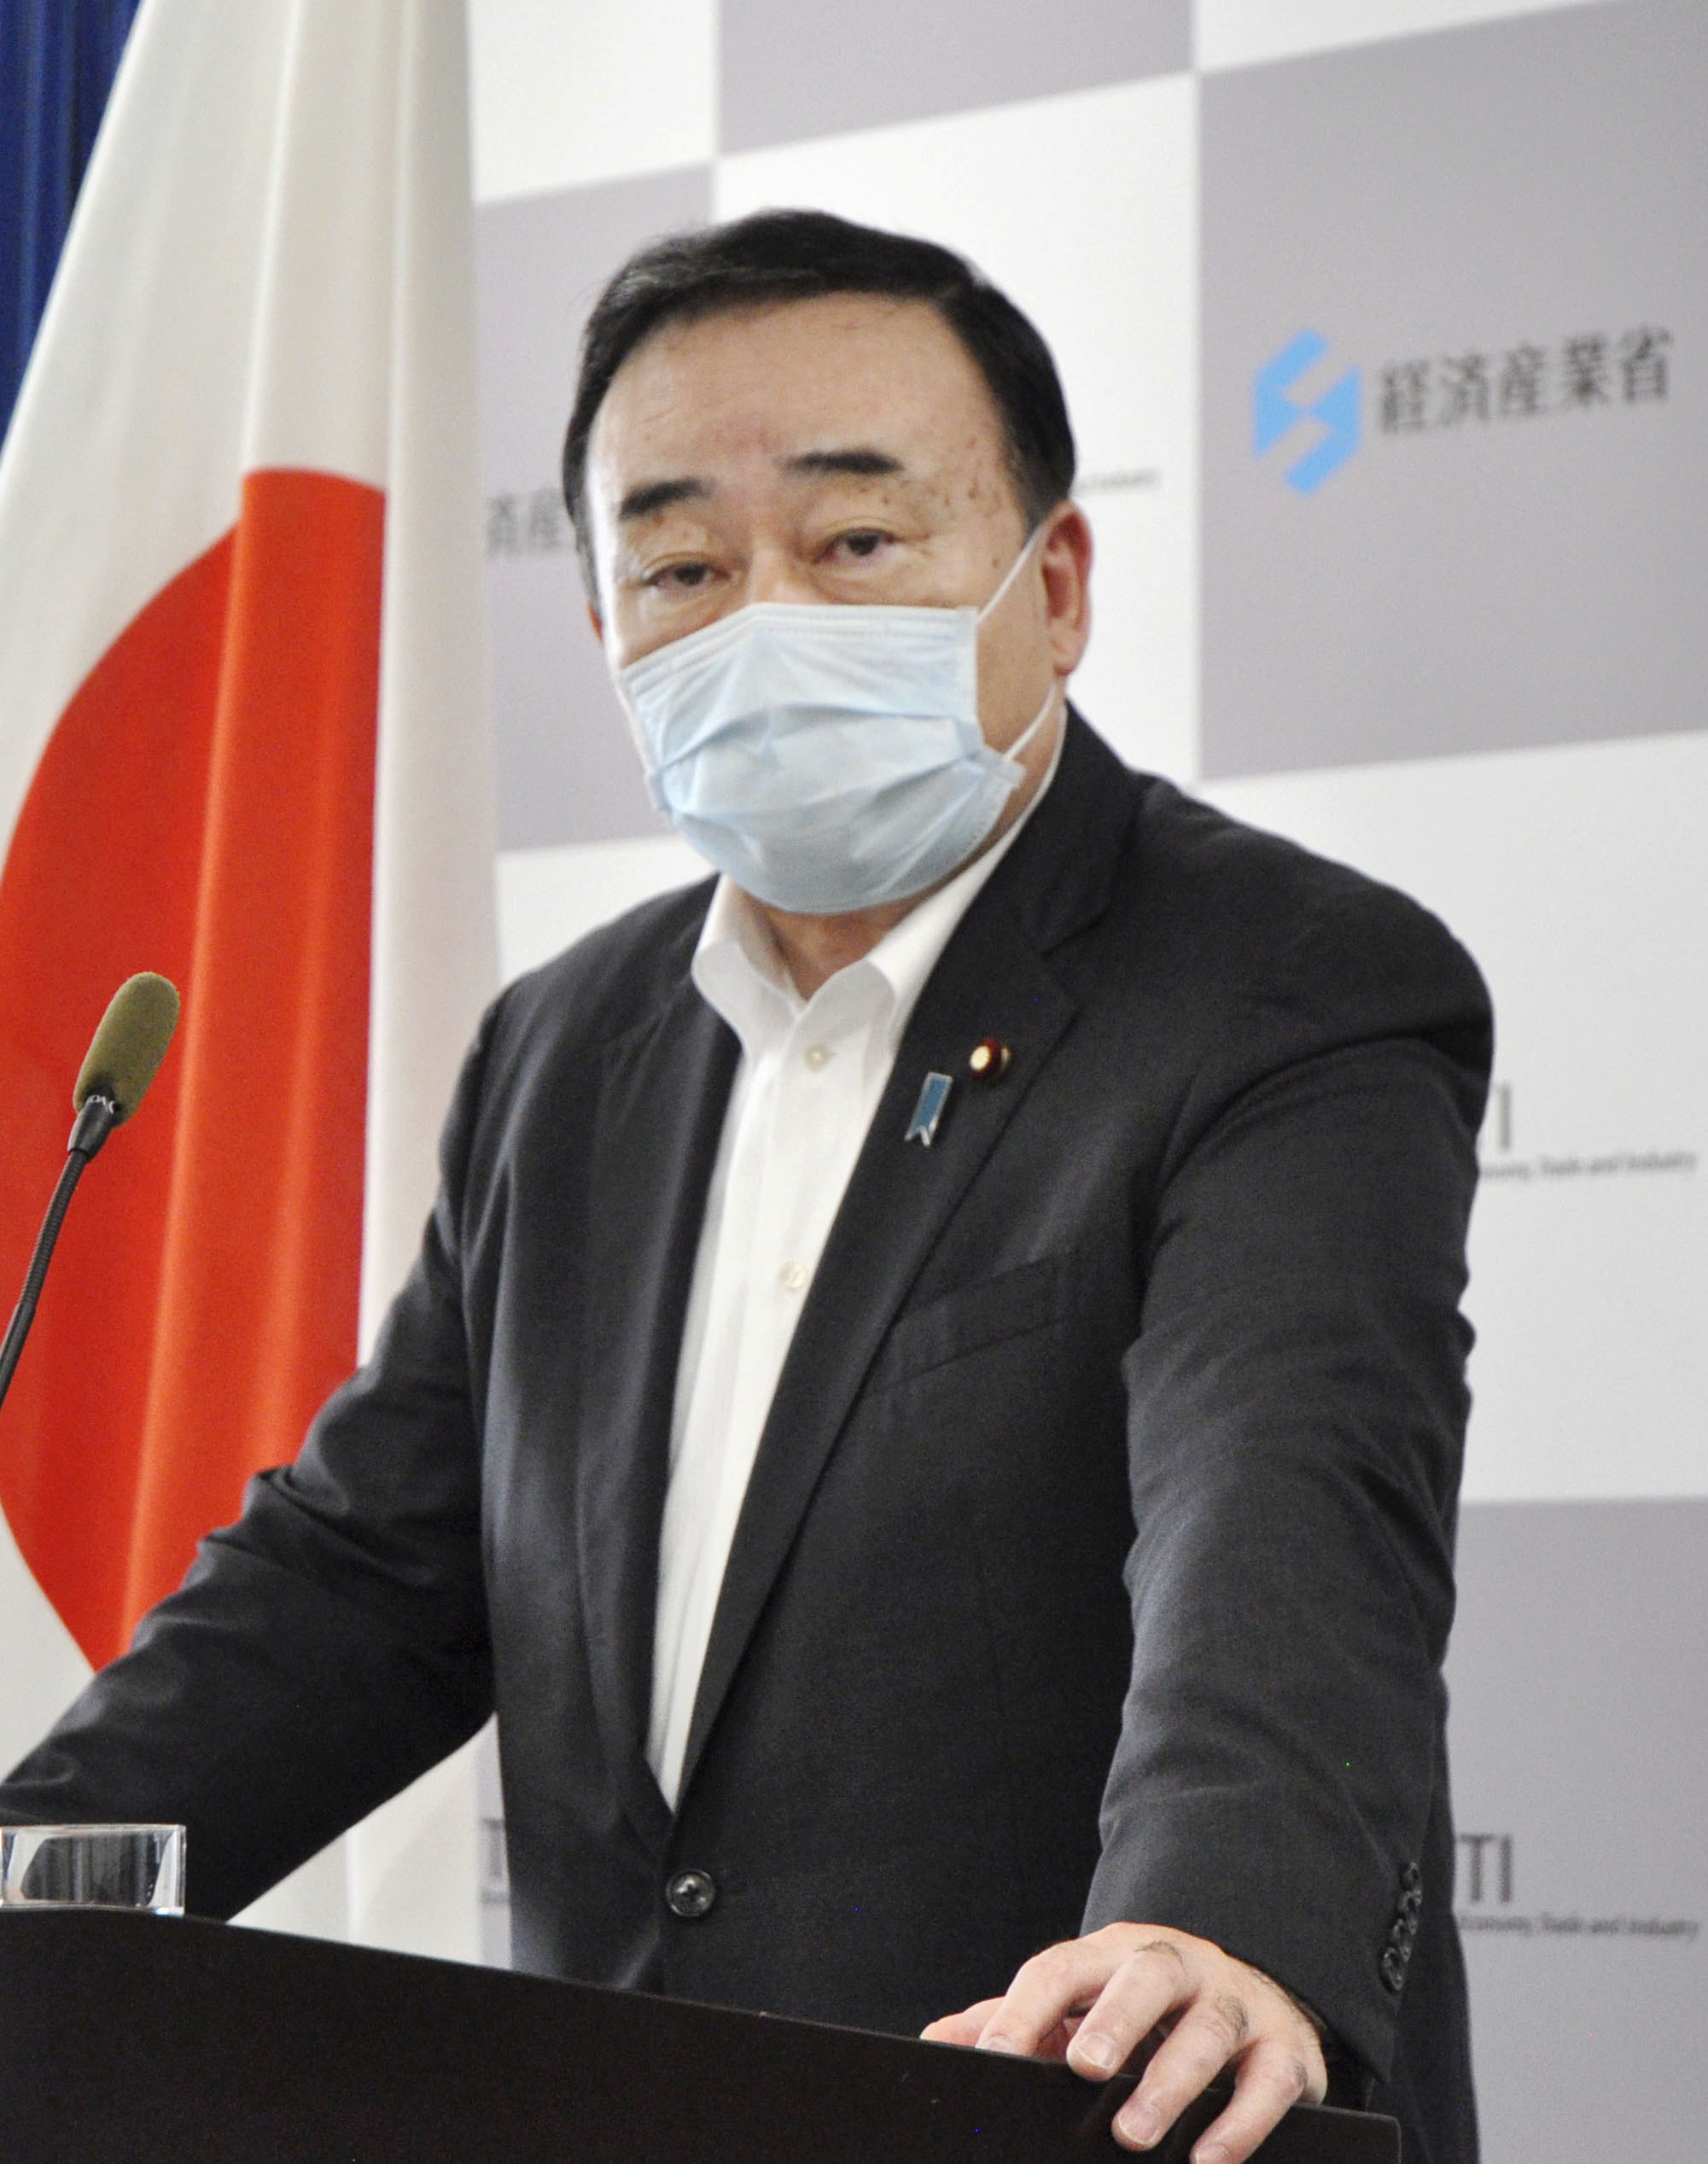 Japan's Economy, Trade and Industry Minister Hiroshi Kajiyama attends a news conference in Tokyo